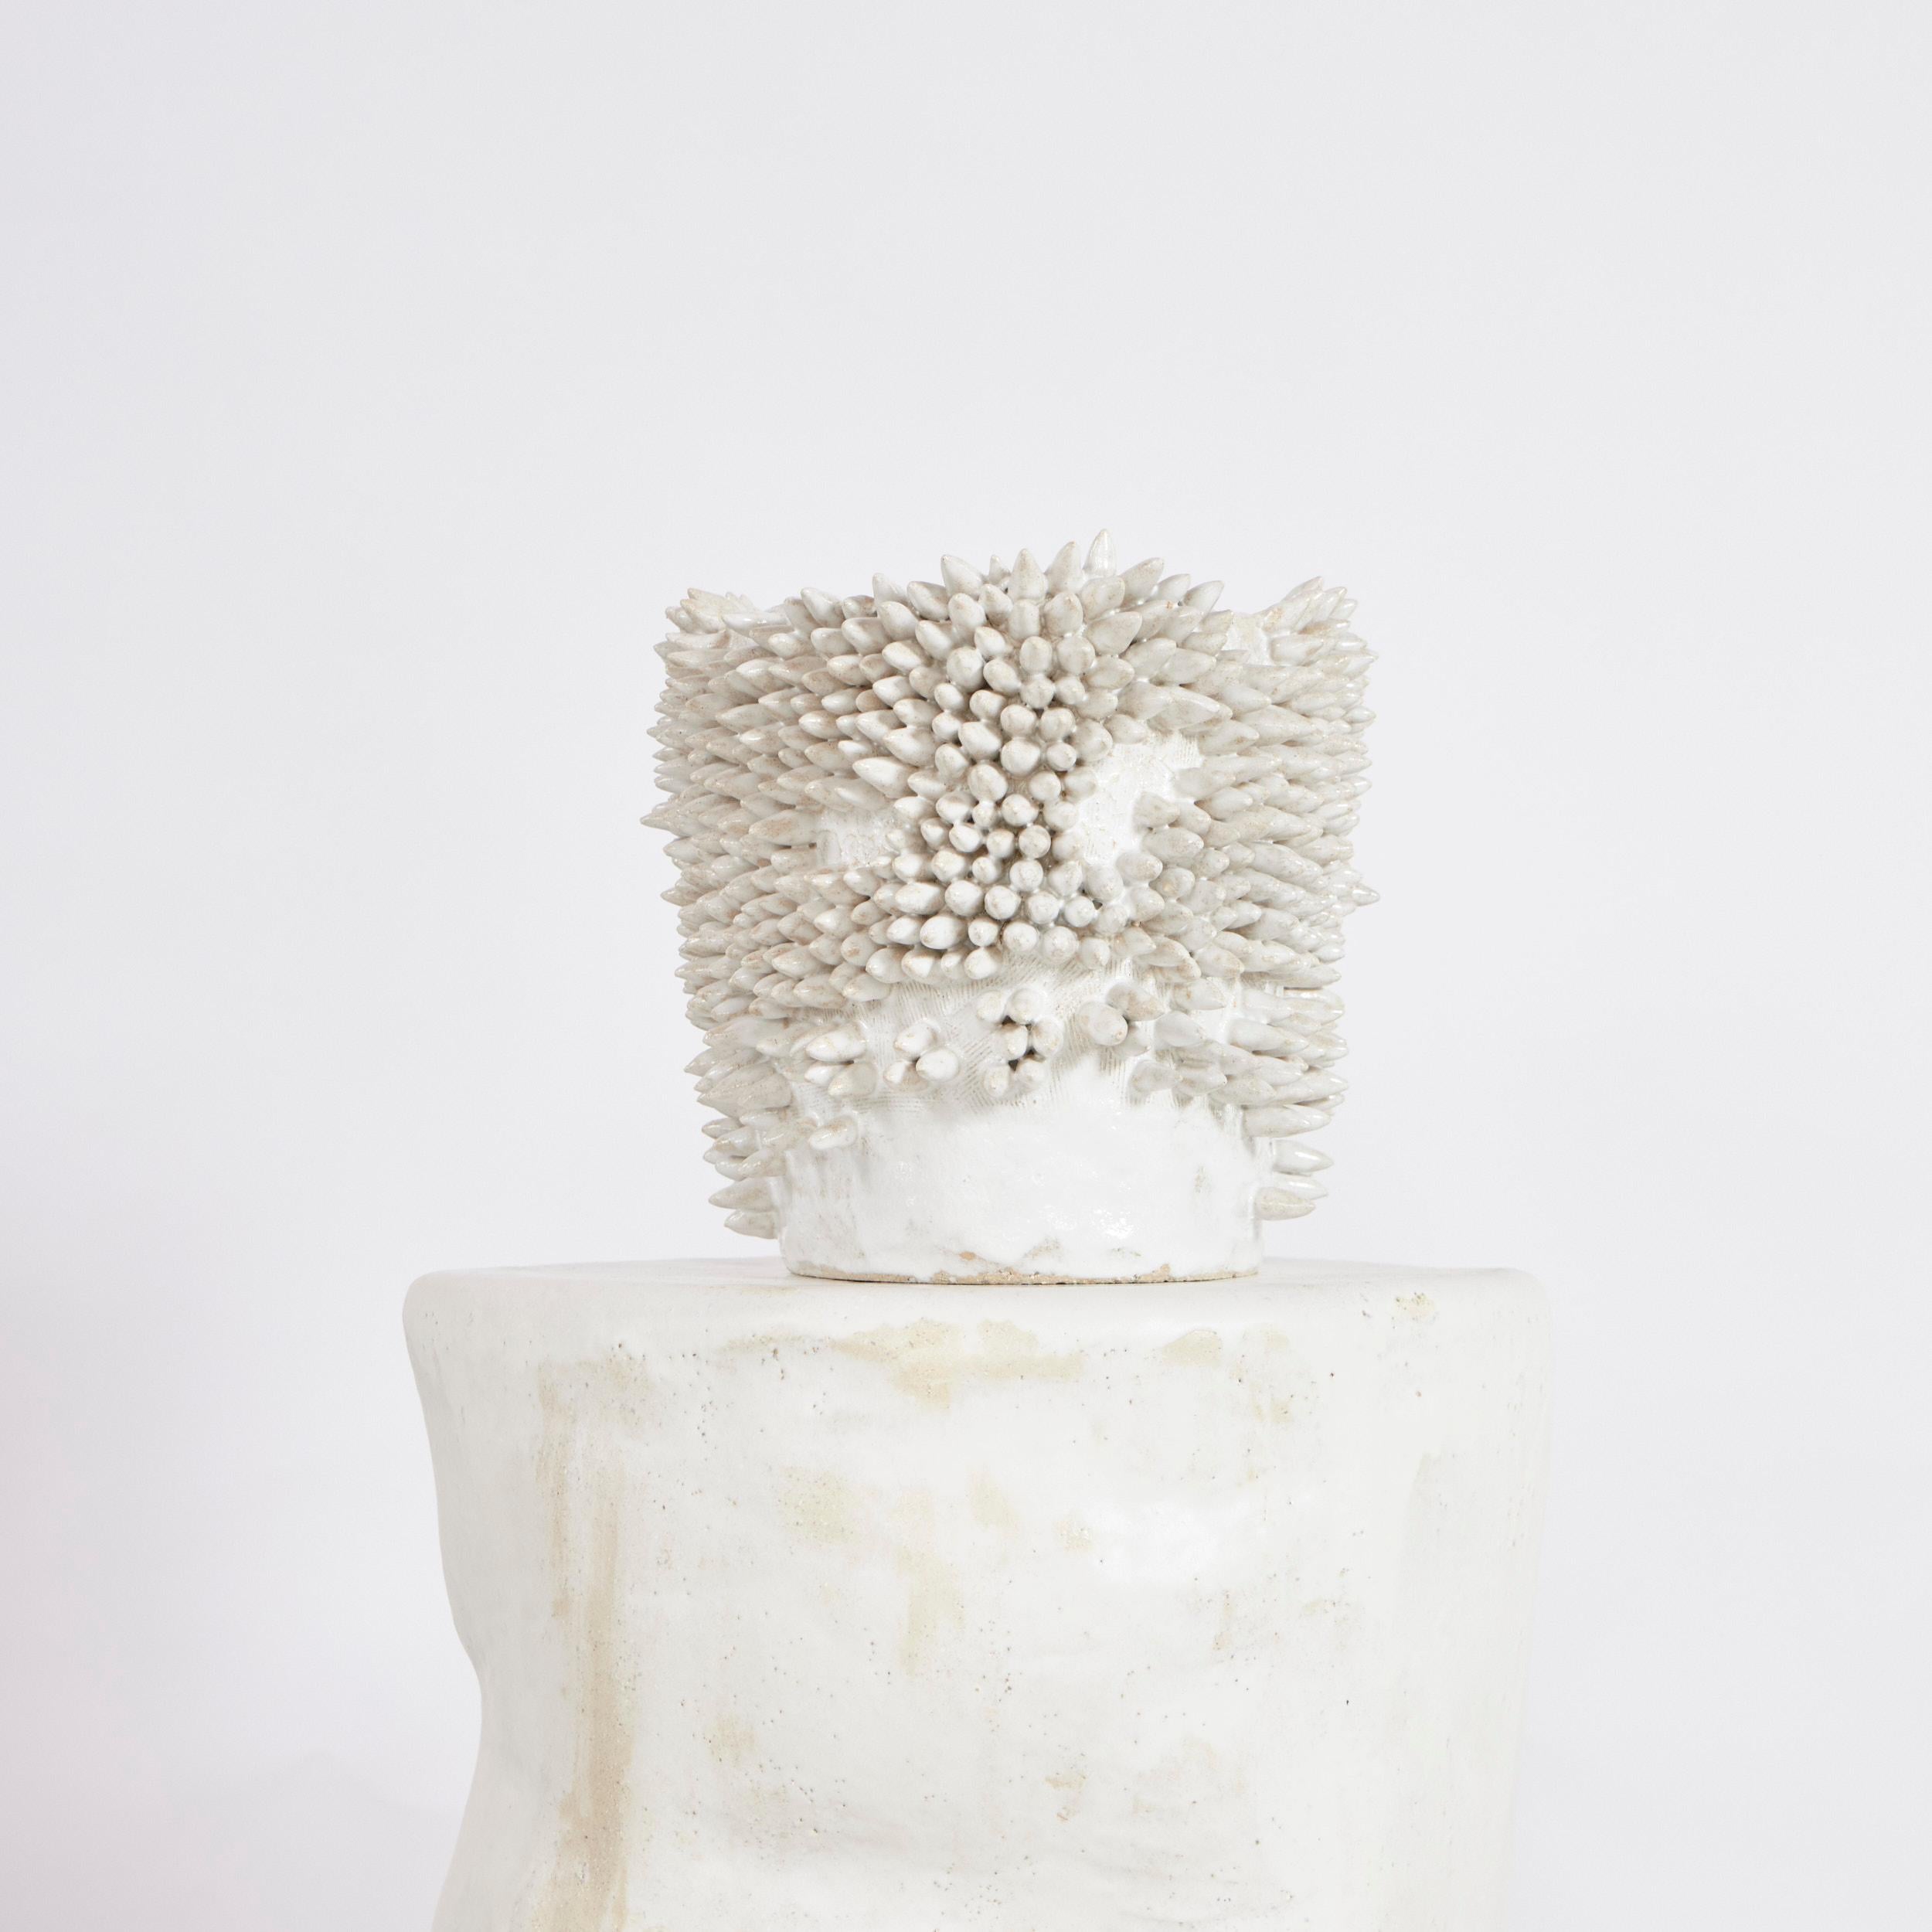 Appuntito Vase Large in White
Designed by Project 213A in 2023

Artisanal ceramic vase created by skilled artisans in Project 213A's own ceramic workshop. The entire vase is covered with 